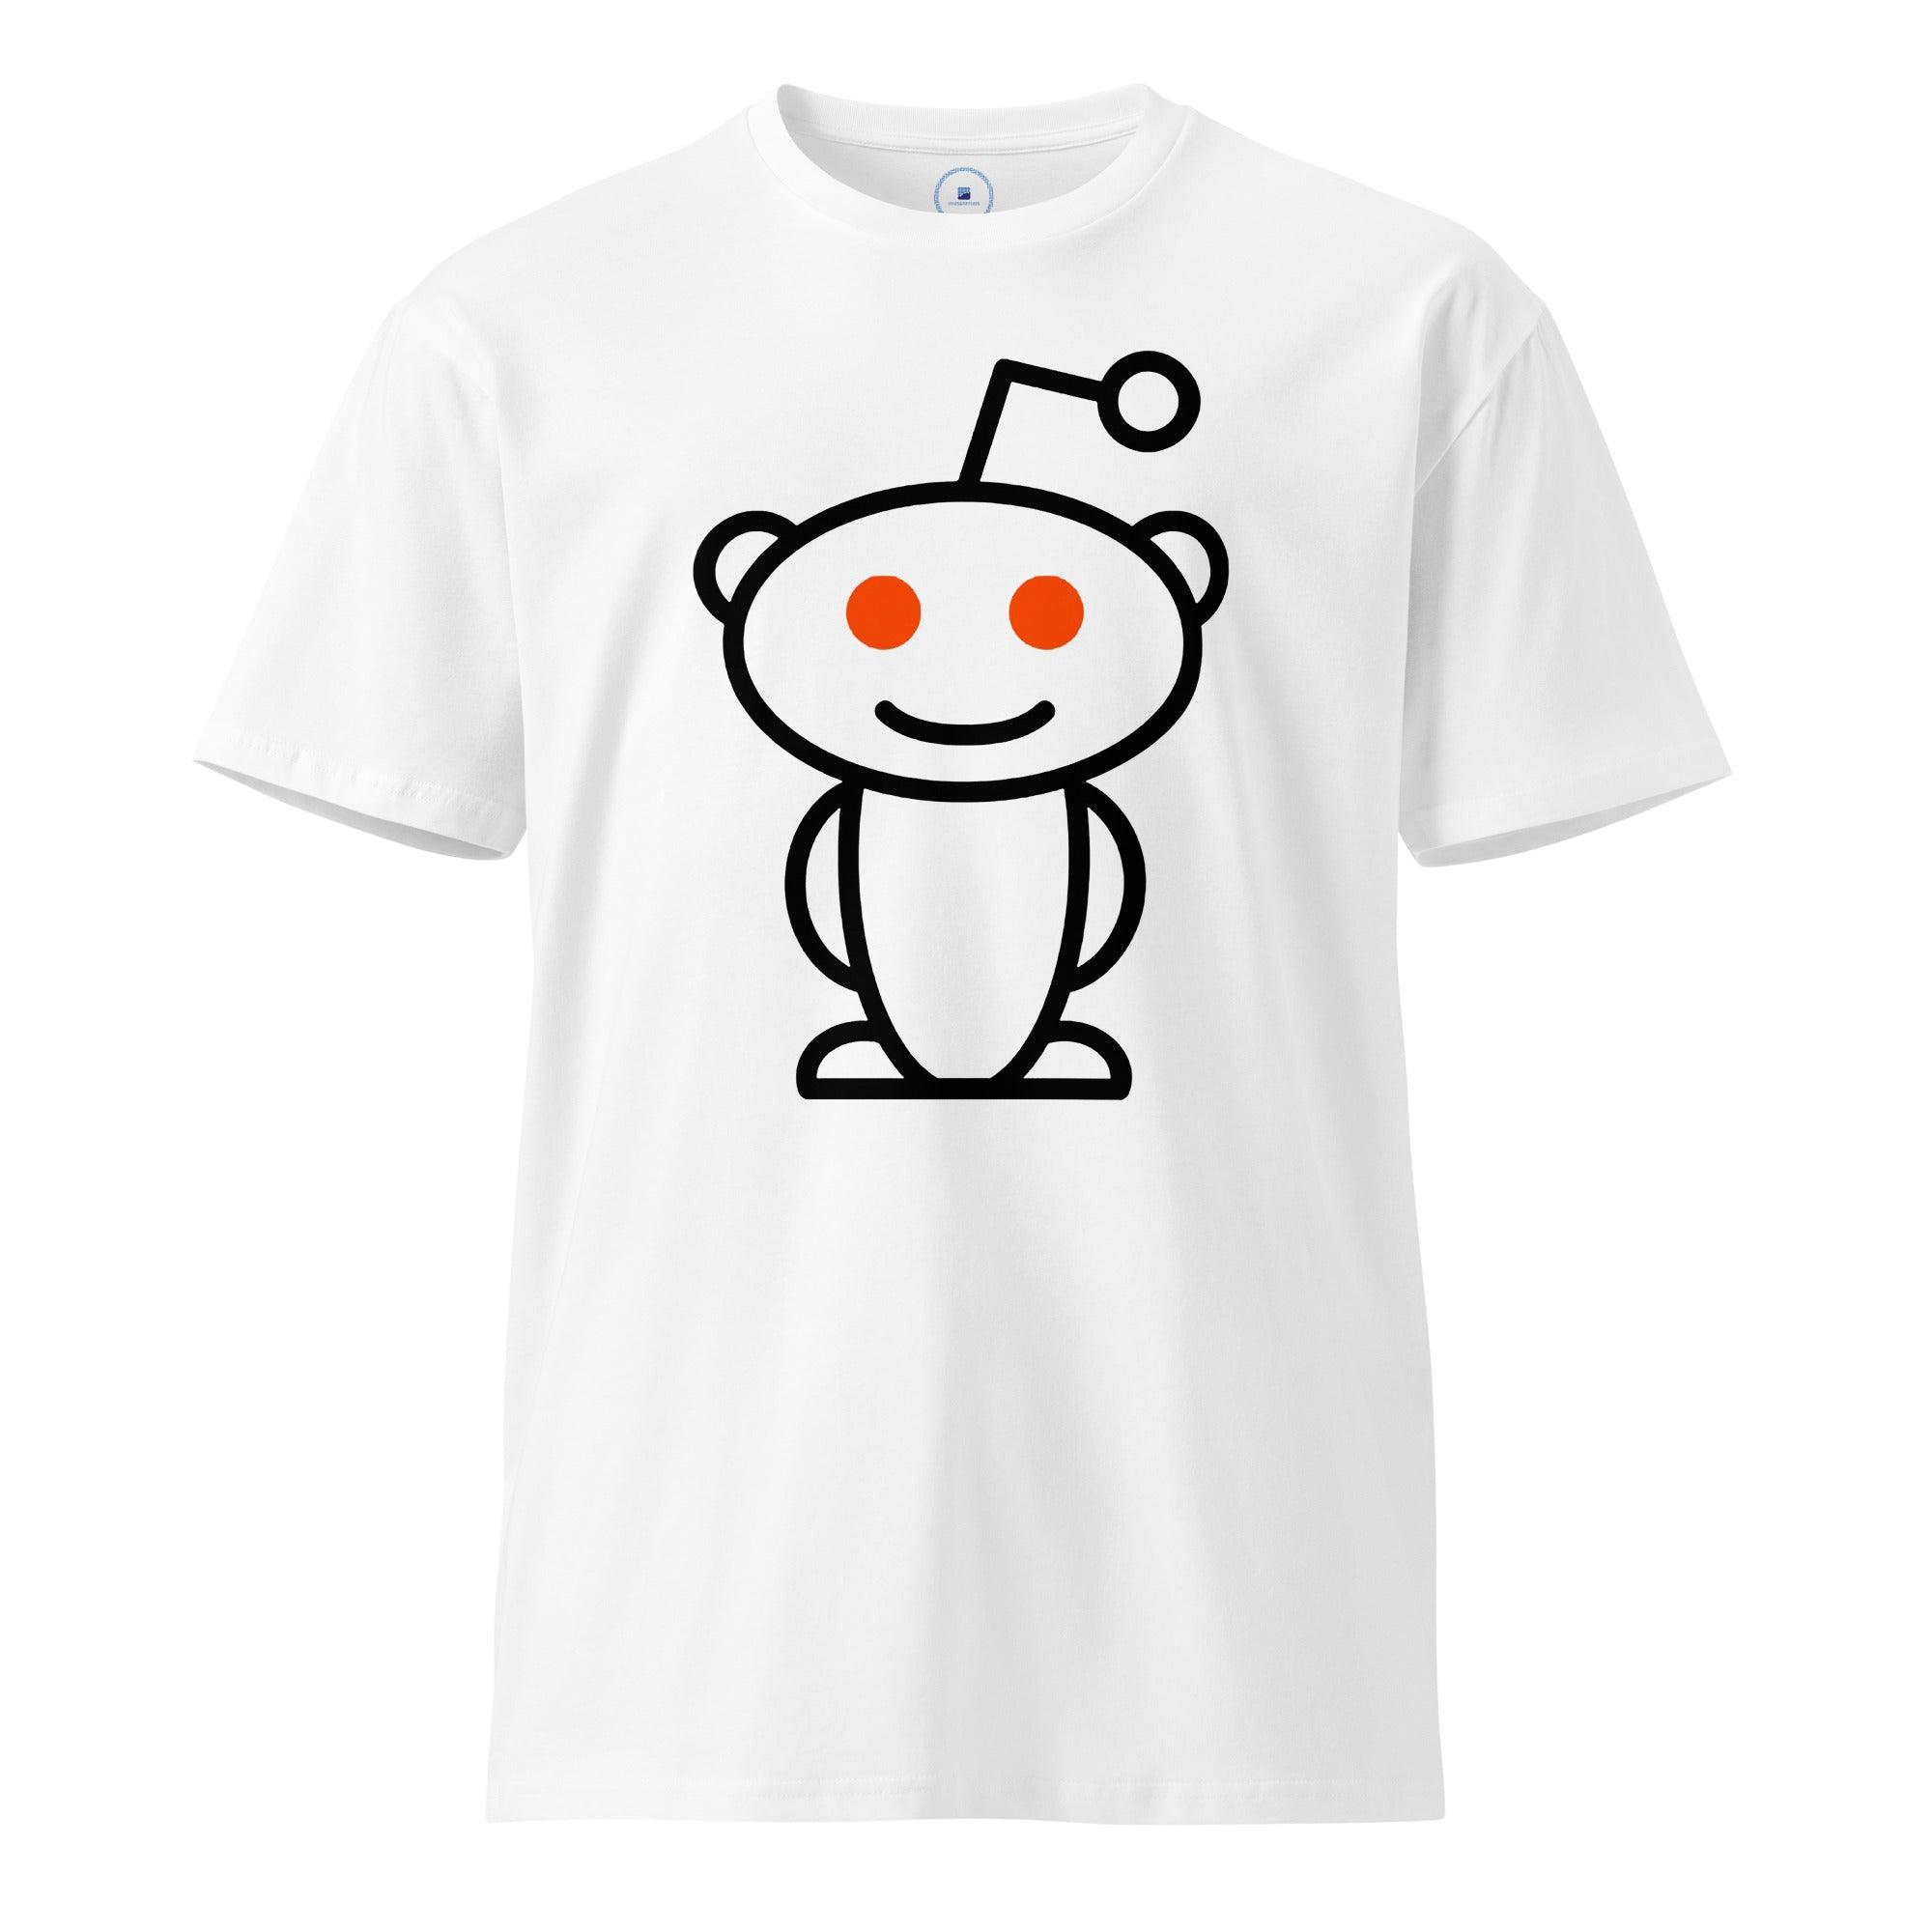 r/ T-Shirt - InvestmenTees